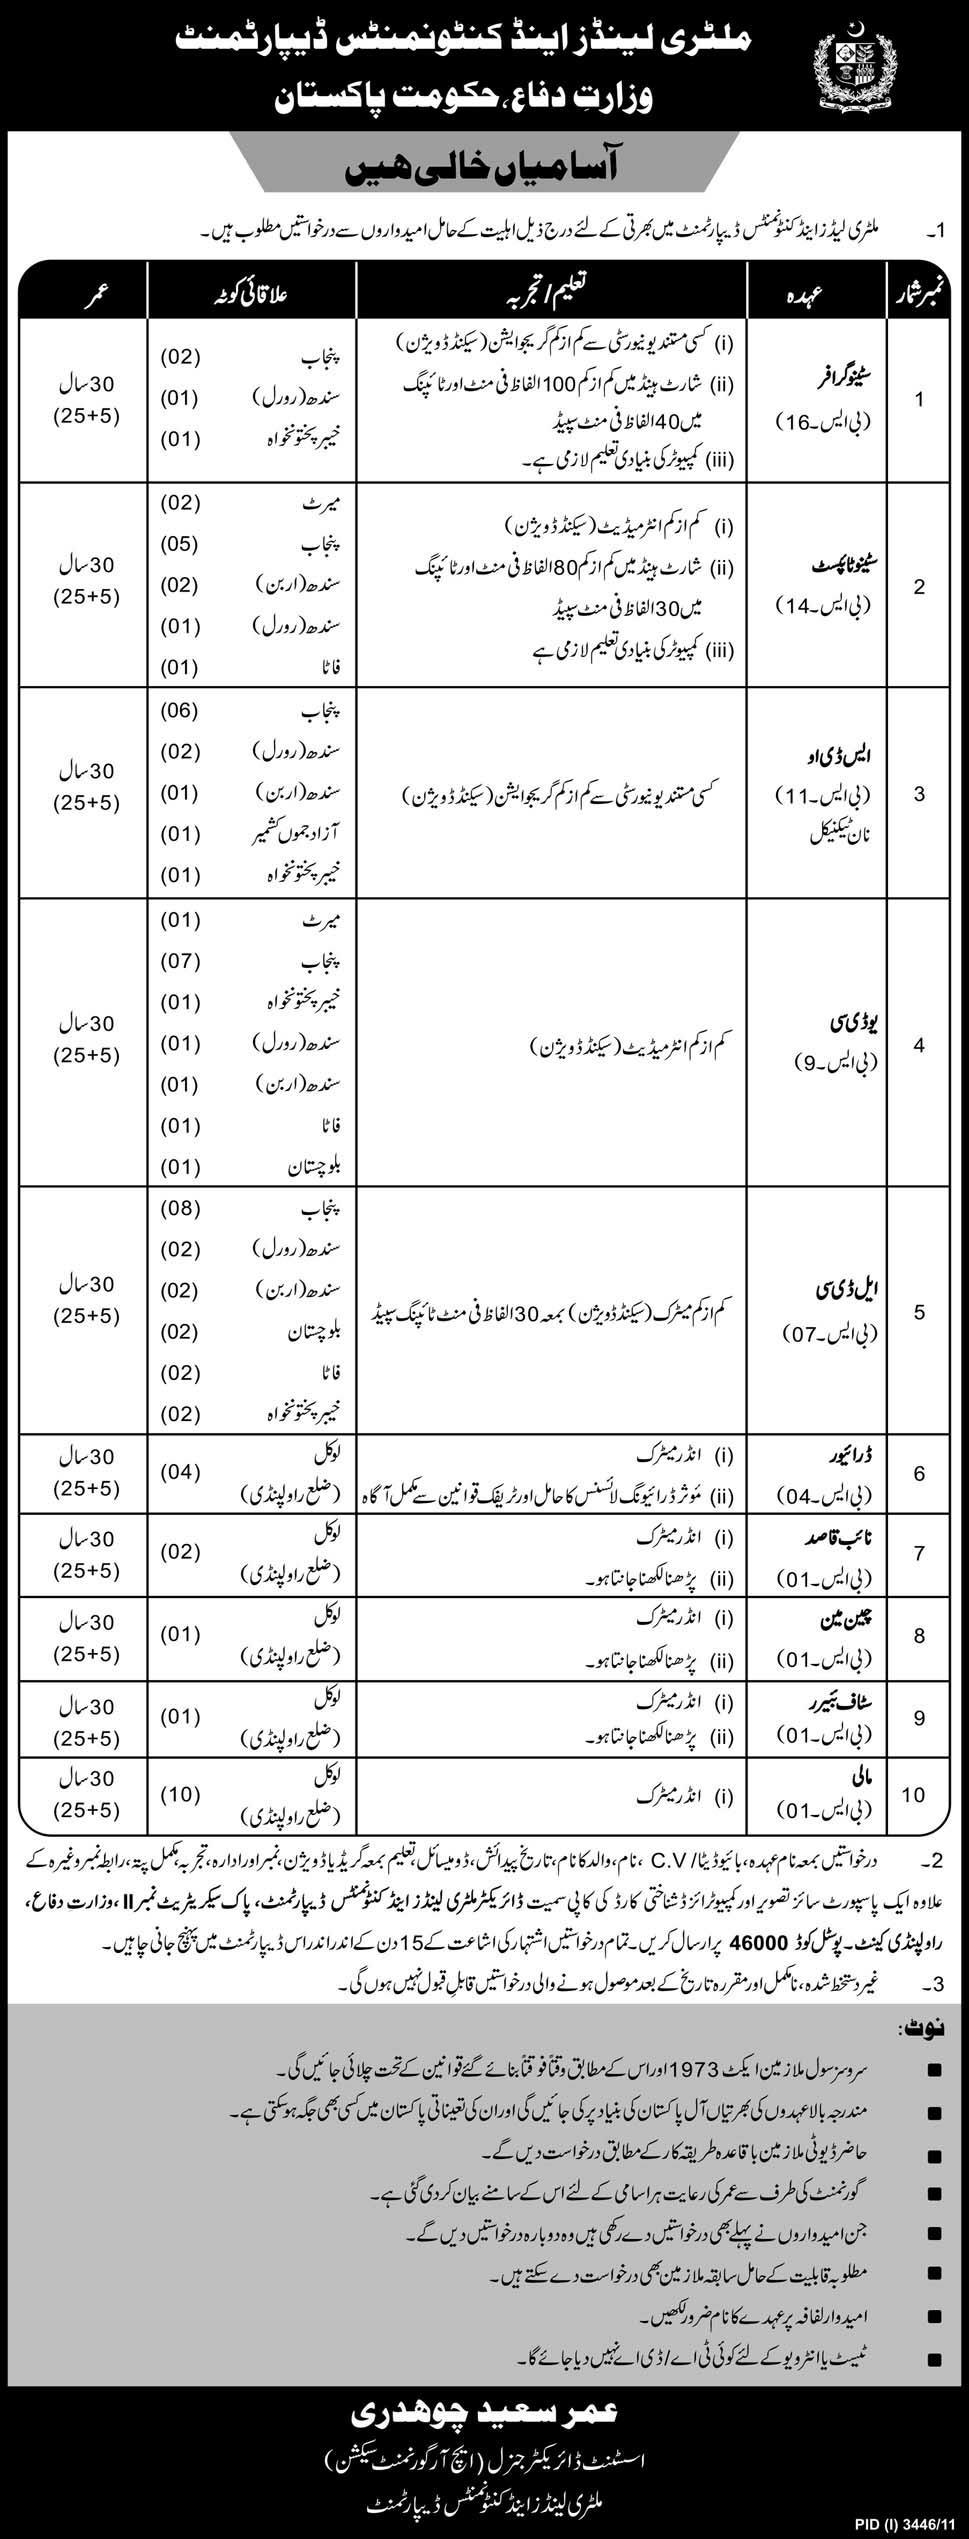 Military Lands and Cantonment Department, Ministry of Defence, Government of Pakistan Jobs Opportunity